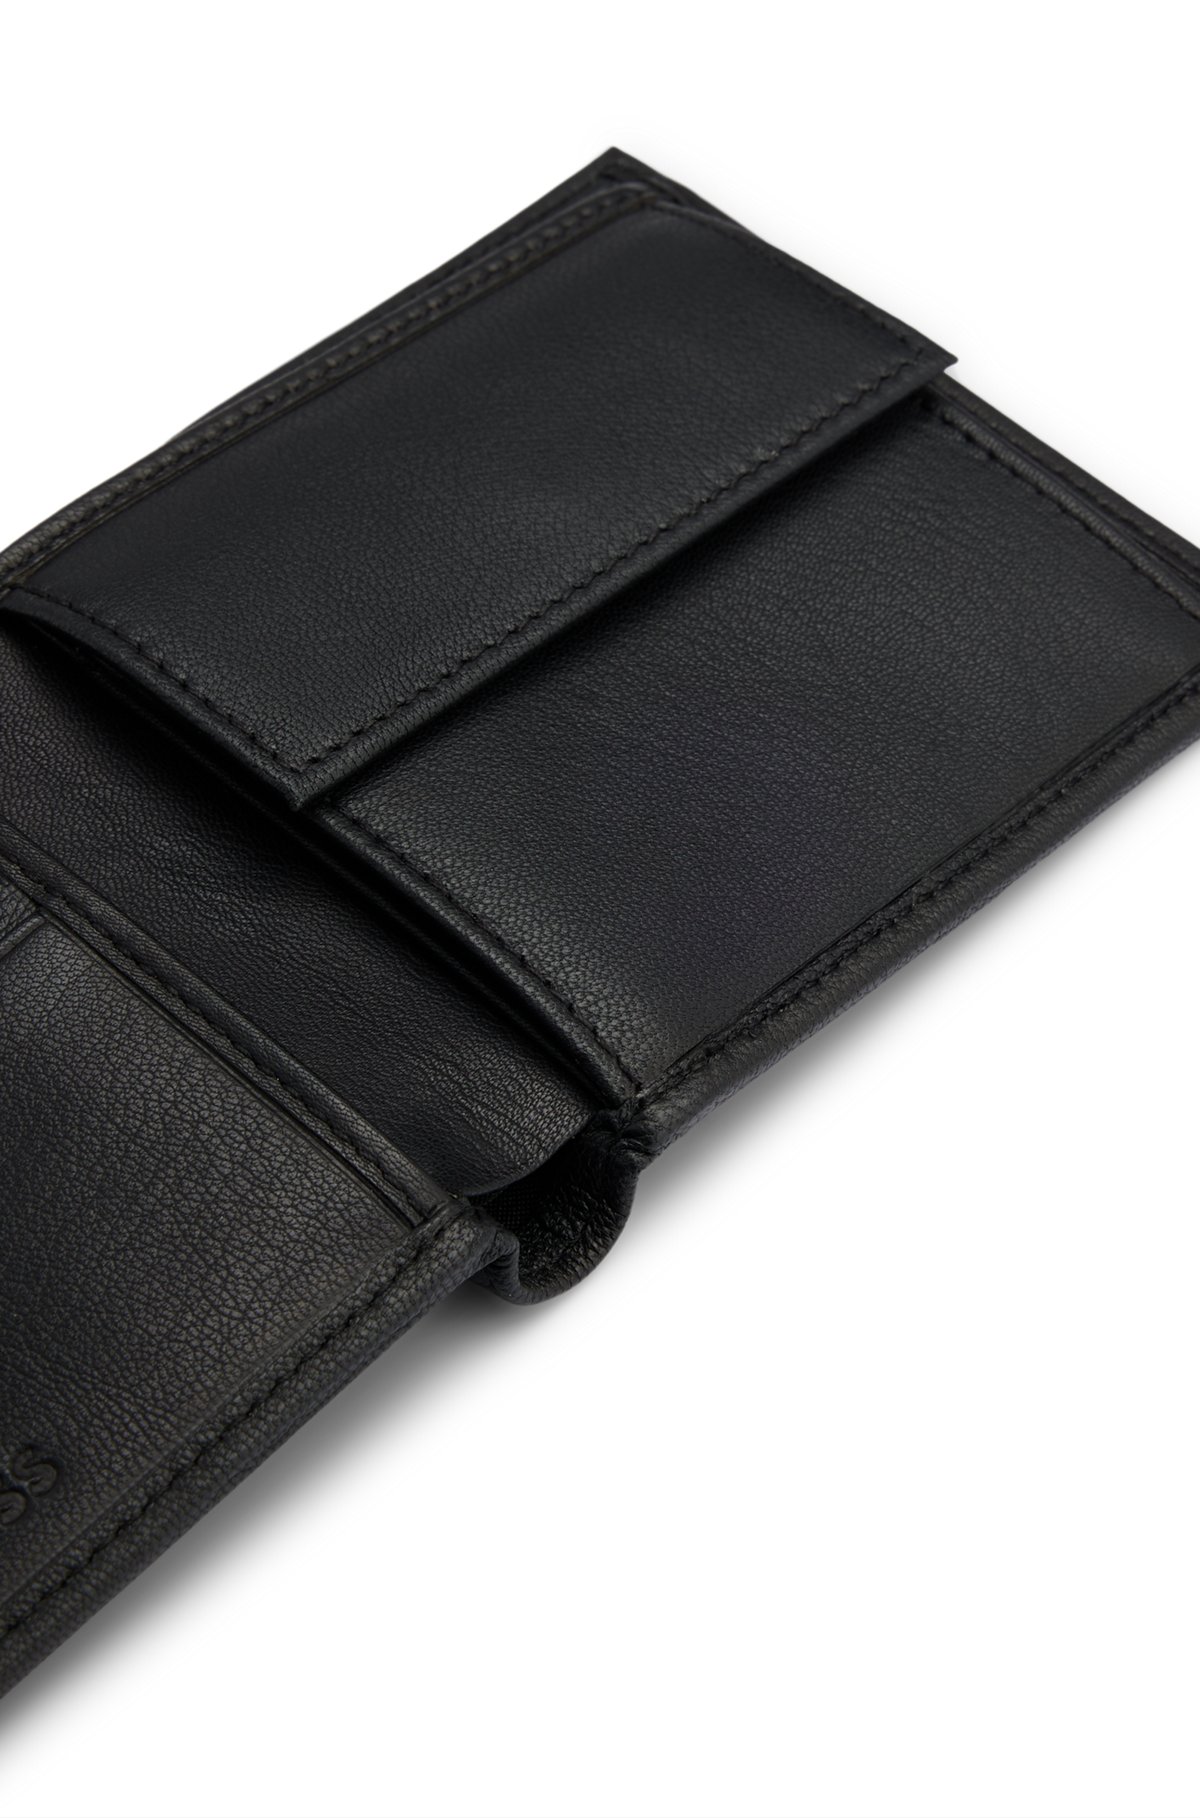 Embossed-logo wallet in grained leather with coin pocket, Black